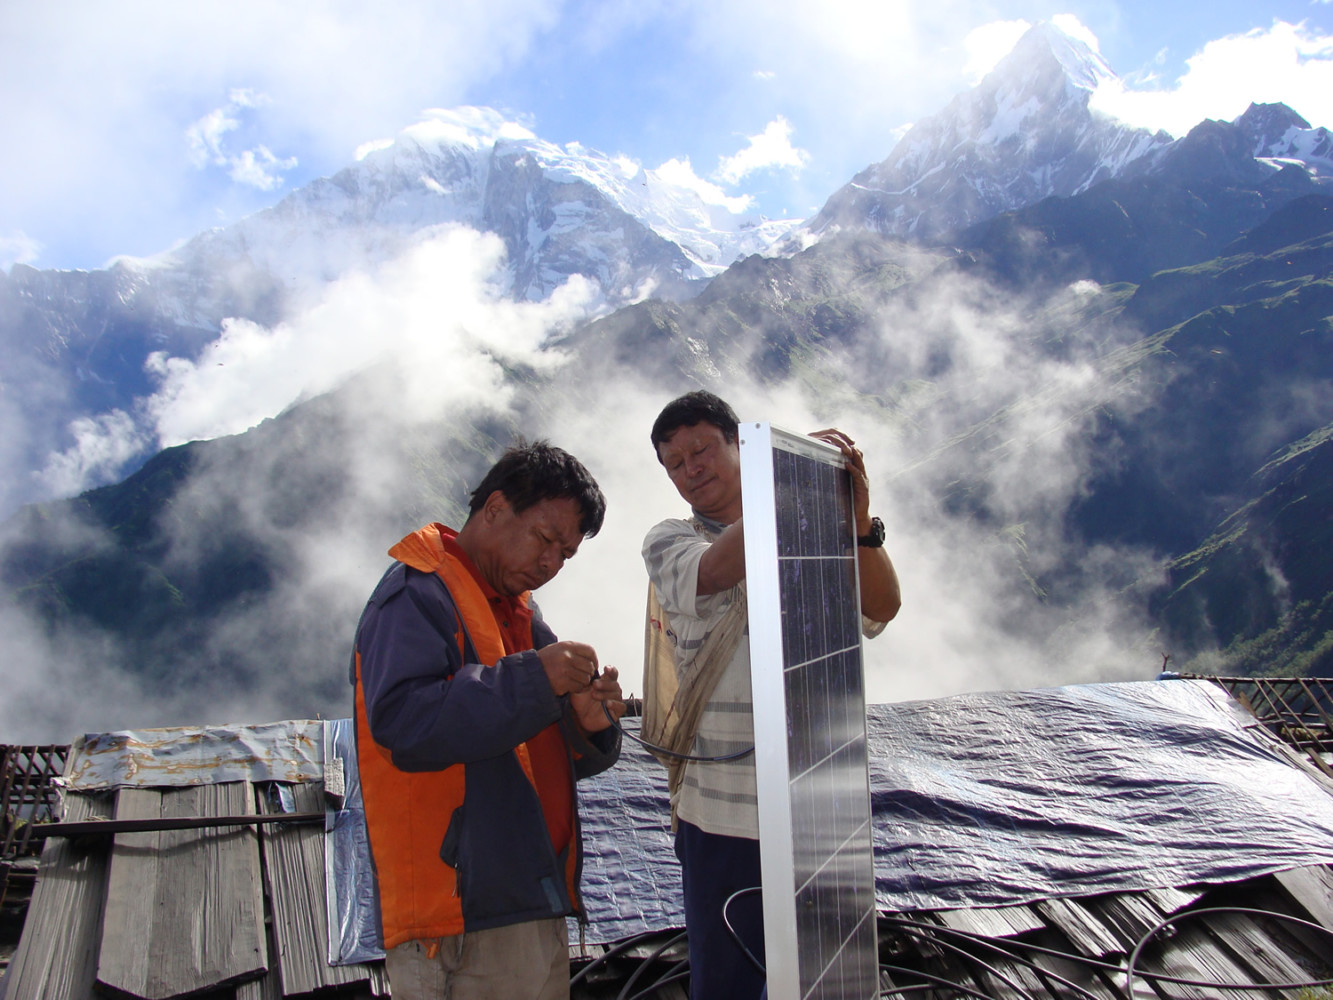 Mahabir Pun is widely known for bringing wireless technology to many parts of rural Nepal.